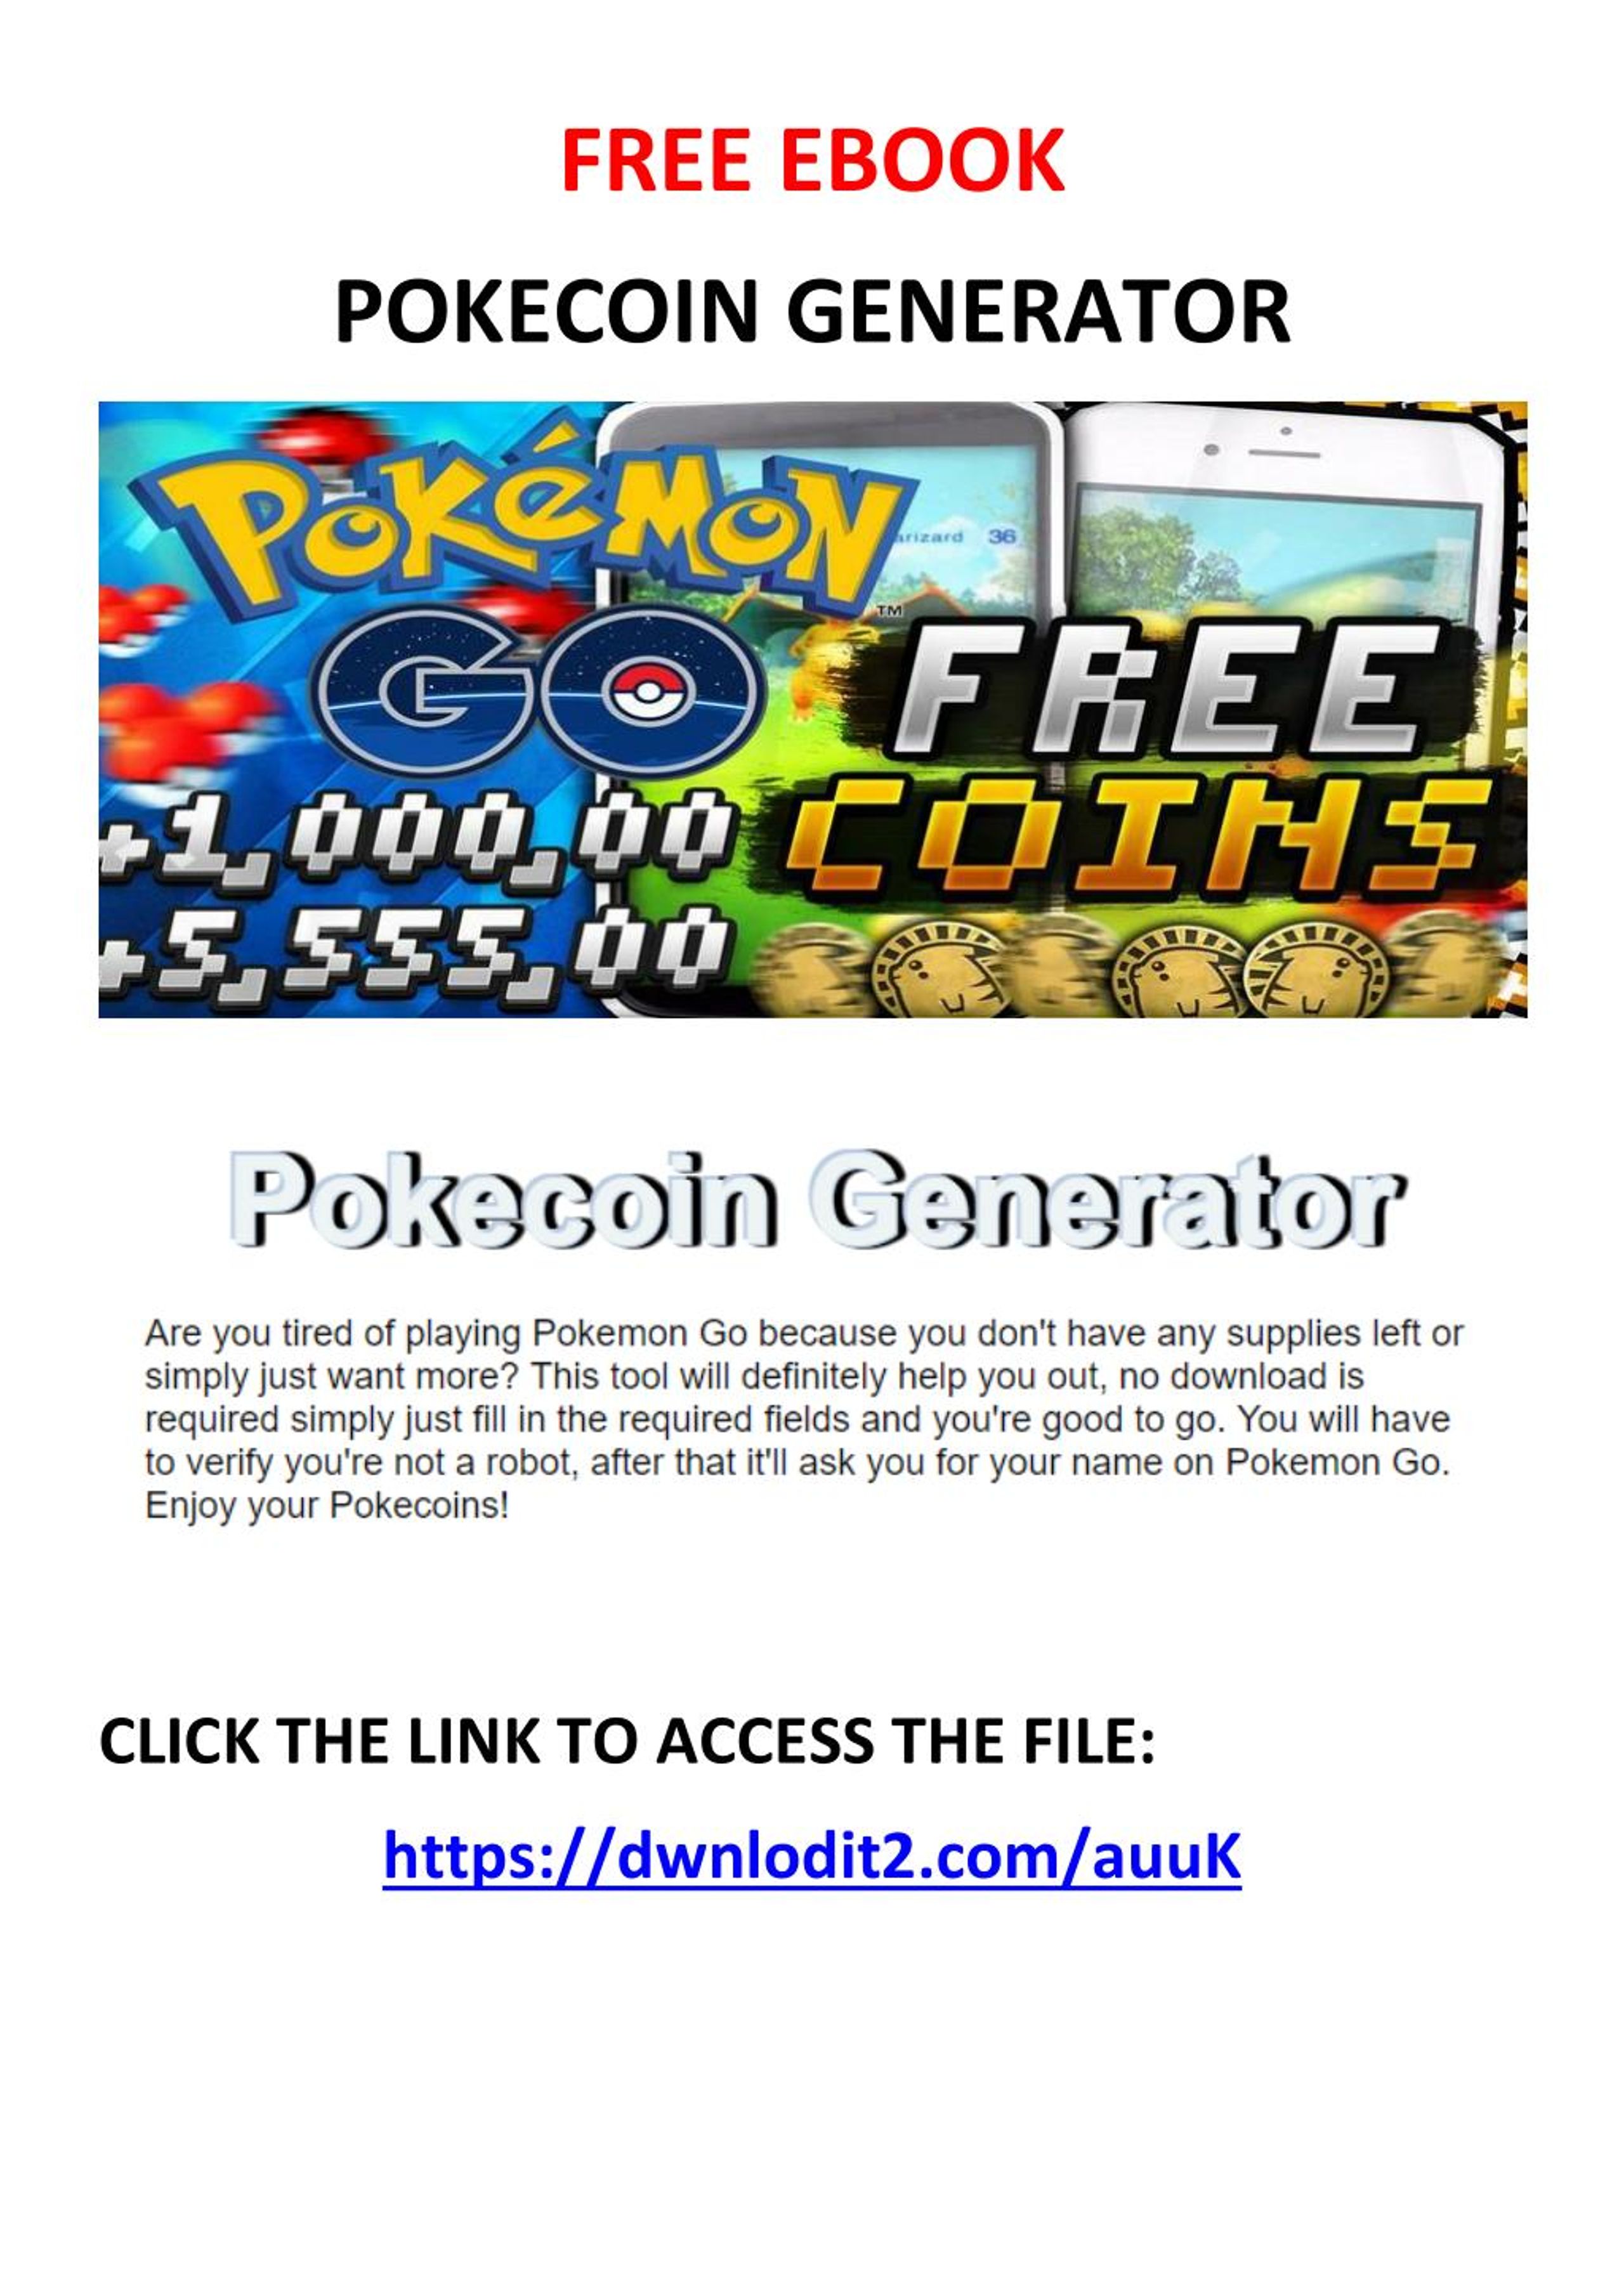 Ppt Pokecoin Generator Powerpoint Presentation Free Download Id 7416199 - robux adder v17 no virus